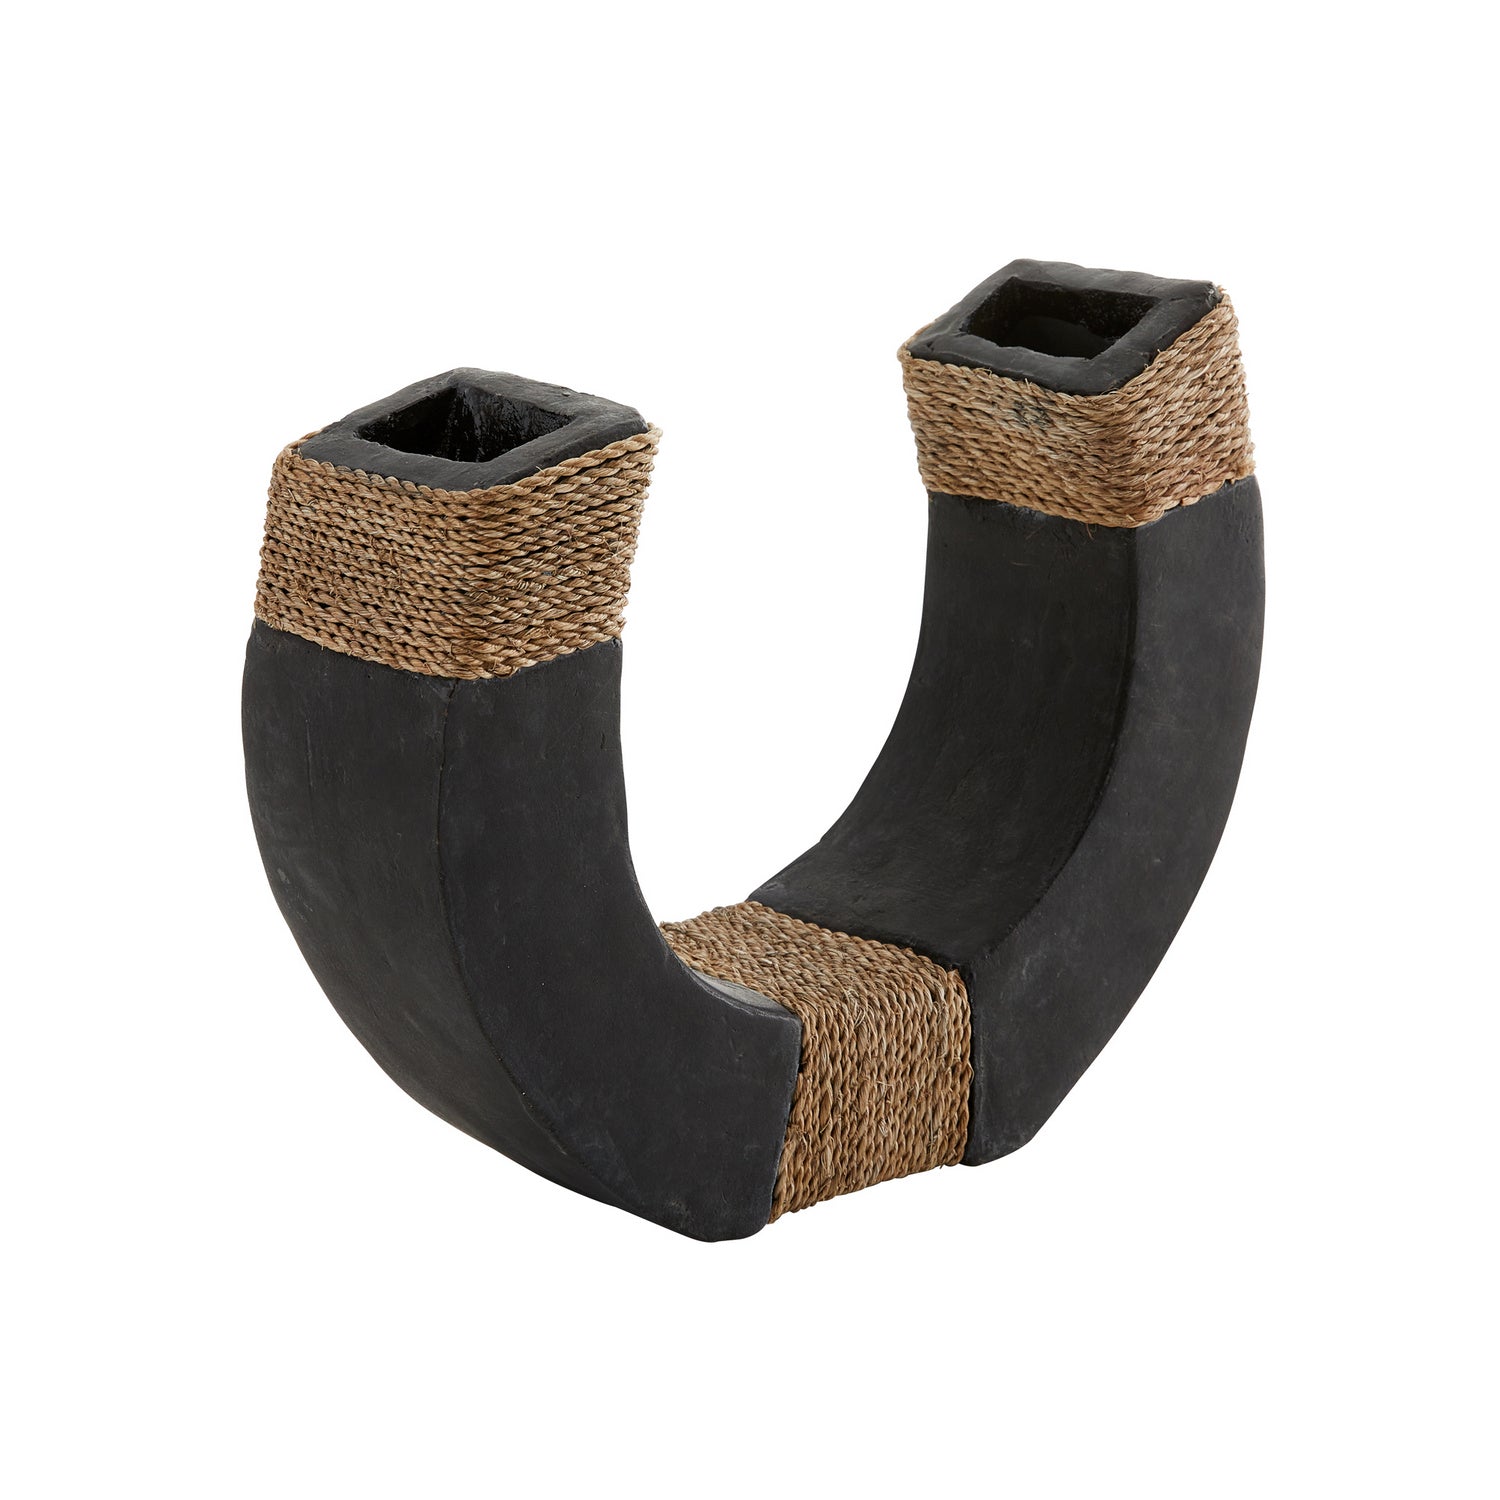 Sculptures, Set of 2 from the Nesbit collection in Matte Charcoal finish